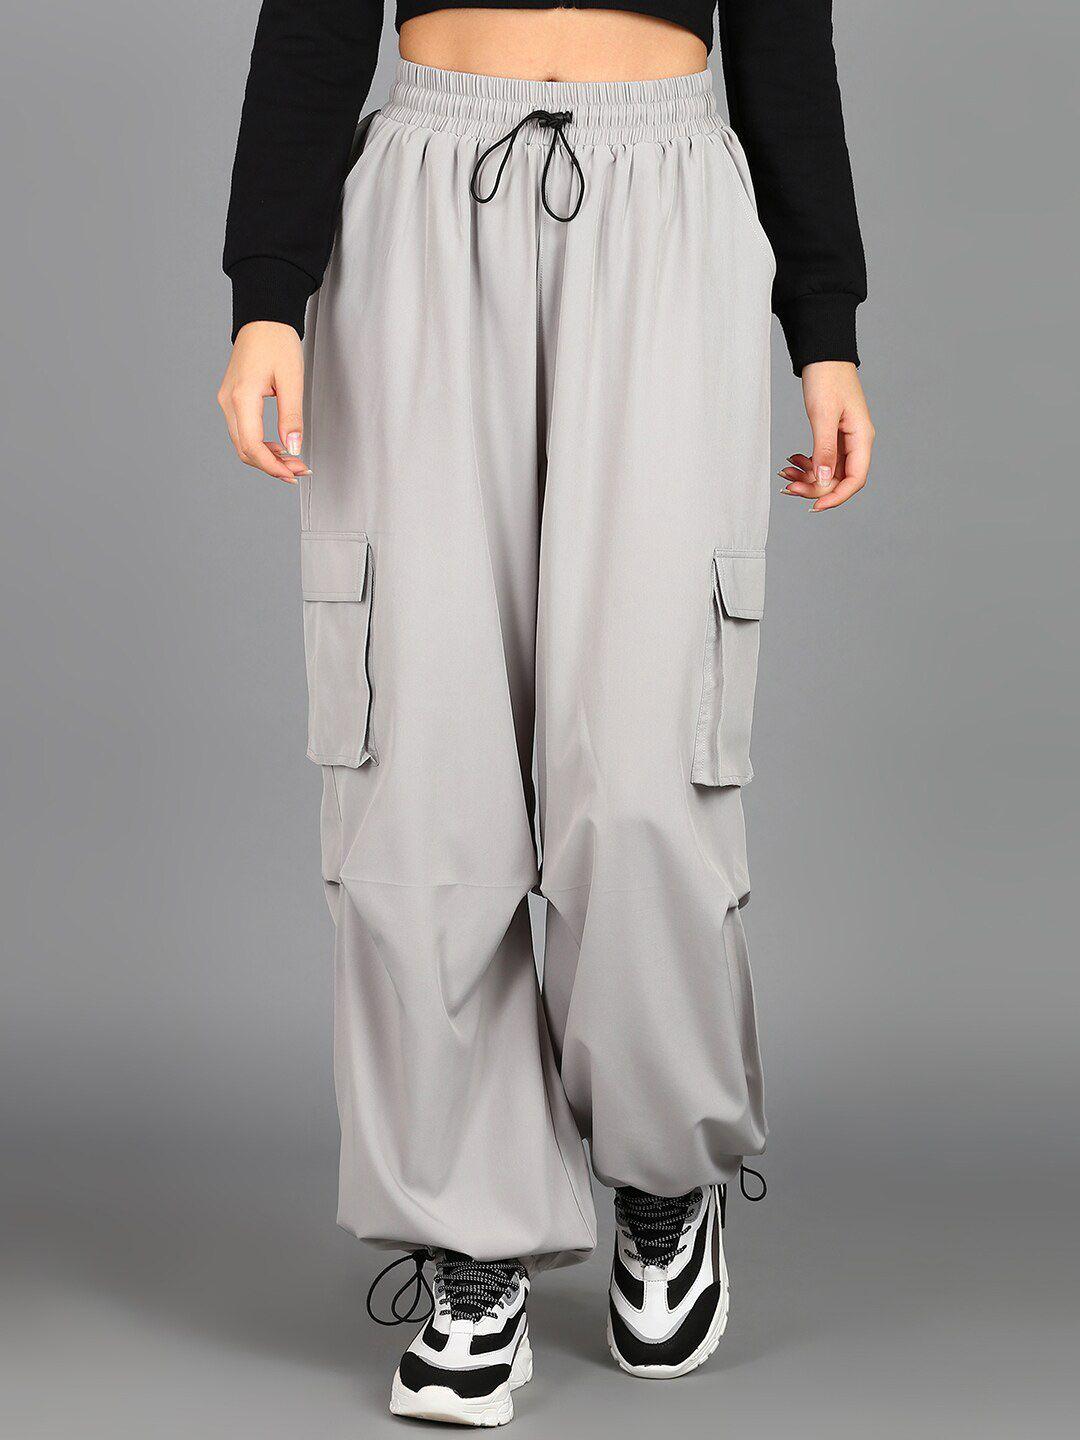 roadster-women-mid-rise-baggy-fit-parachute-joggers